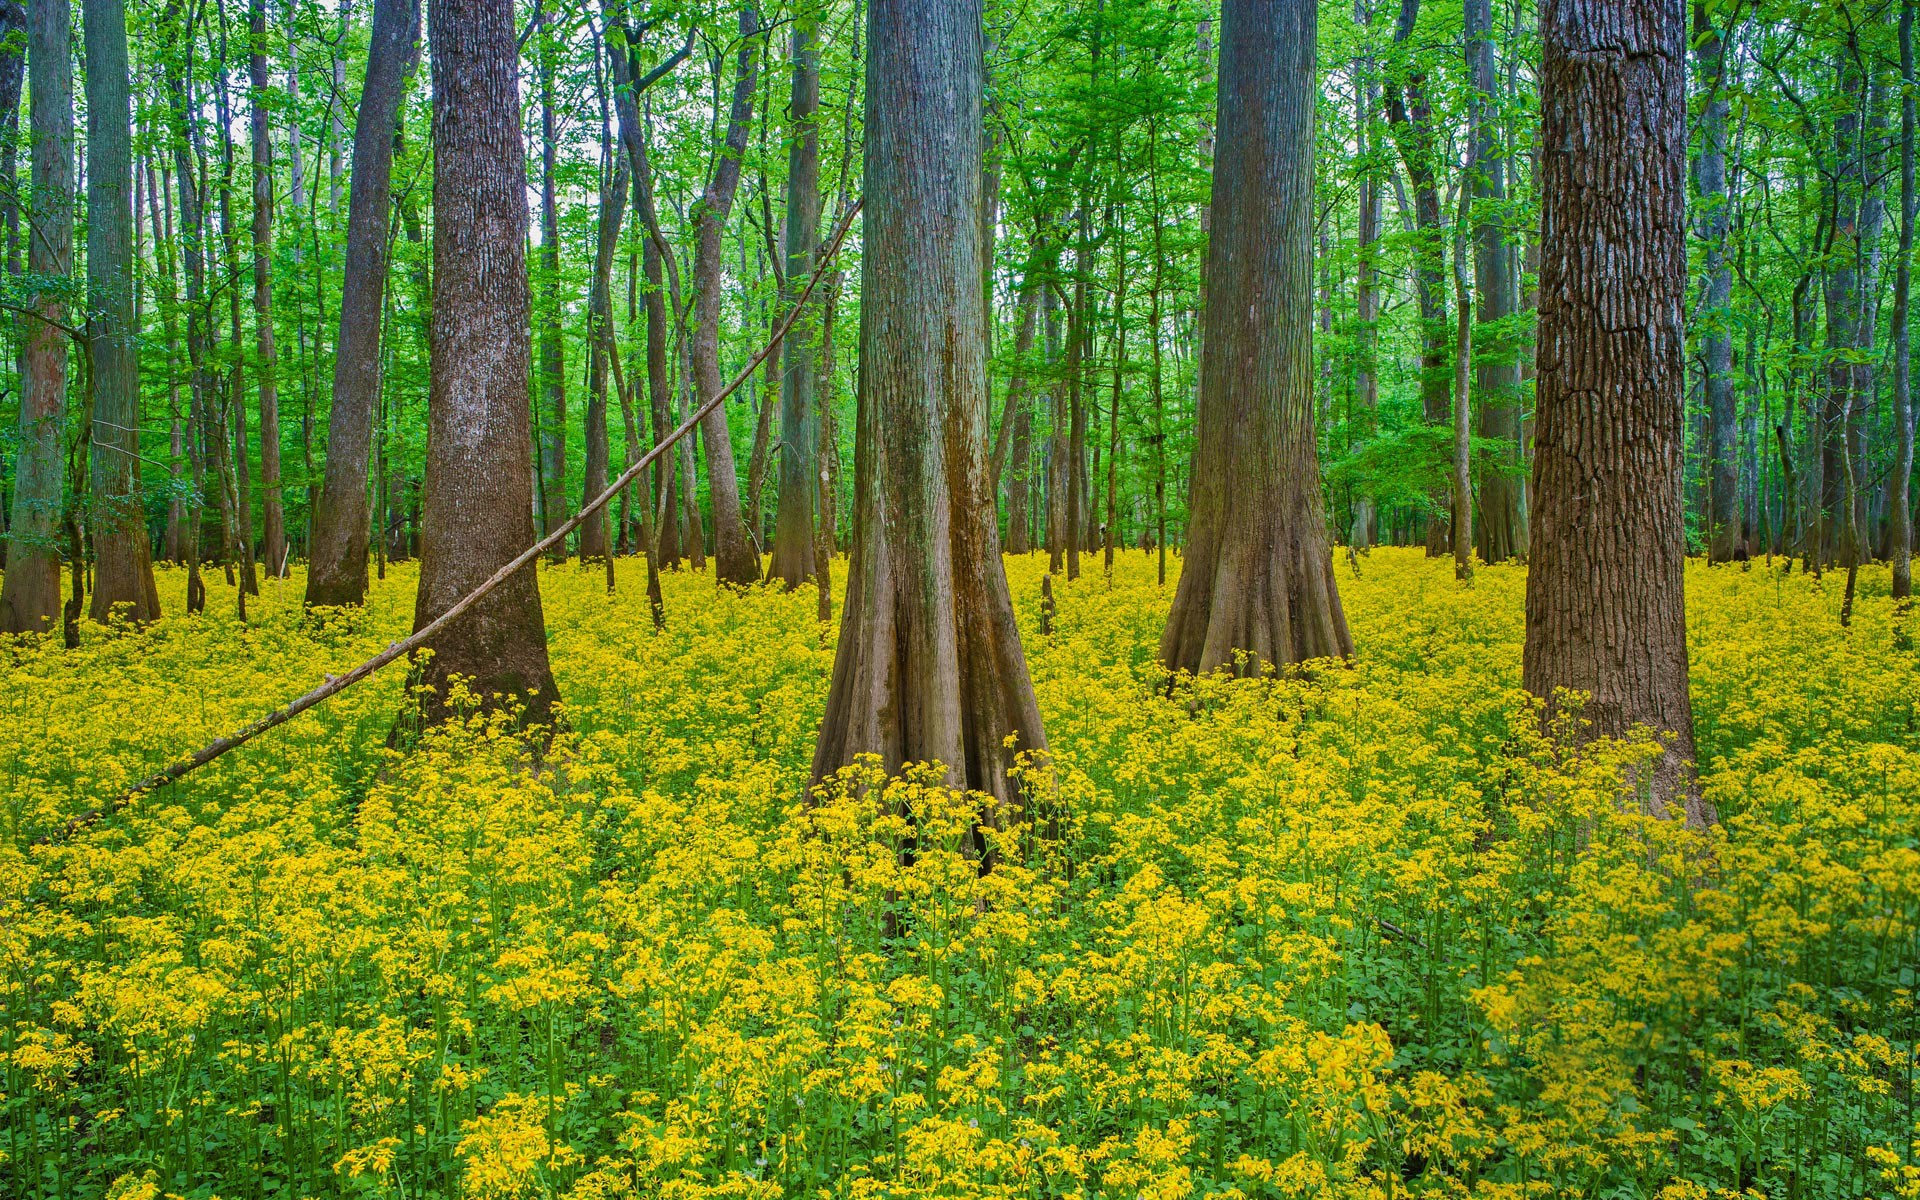 Blooming Butterweed in Forest